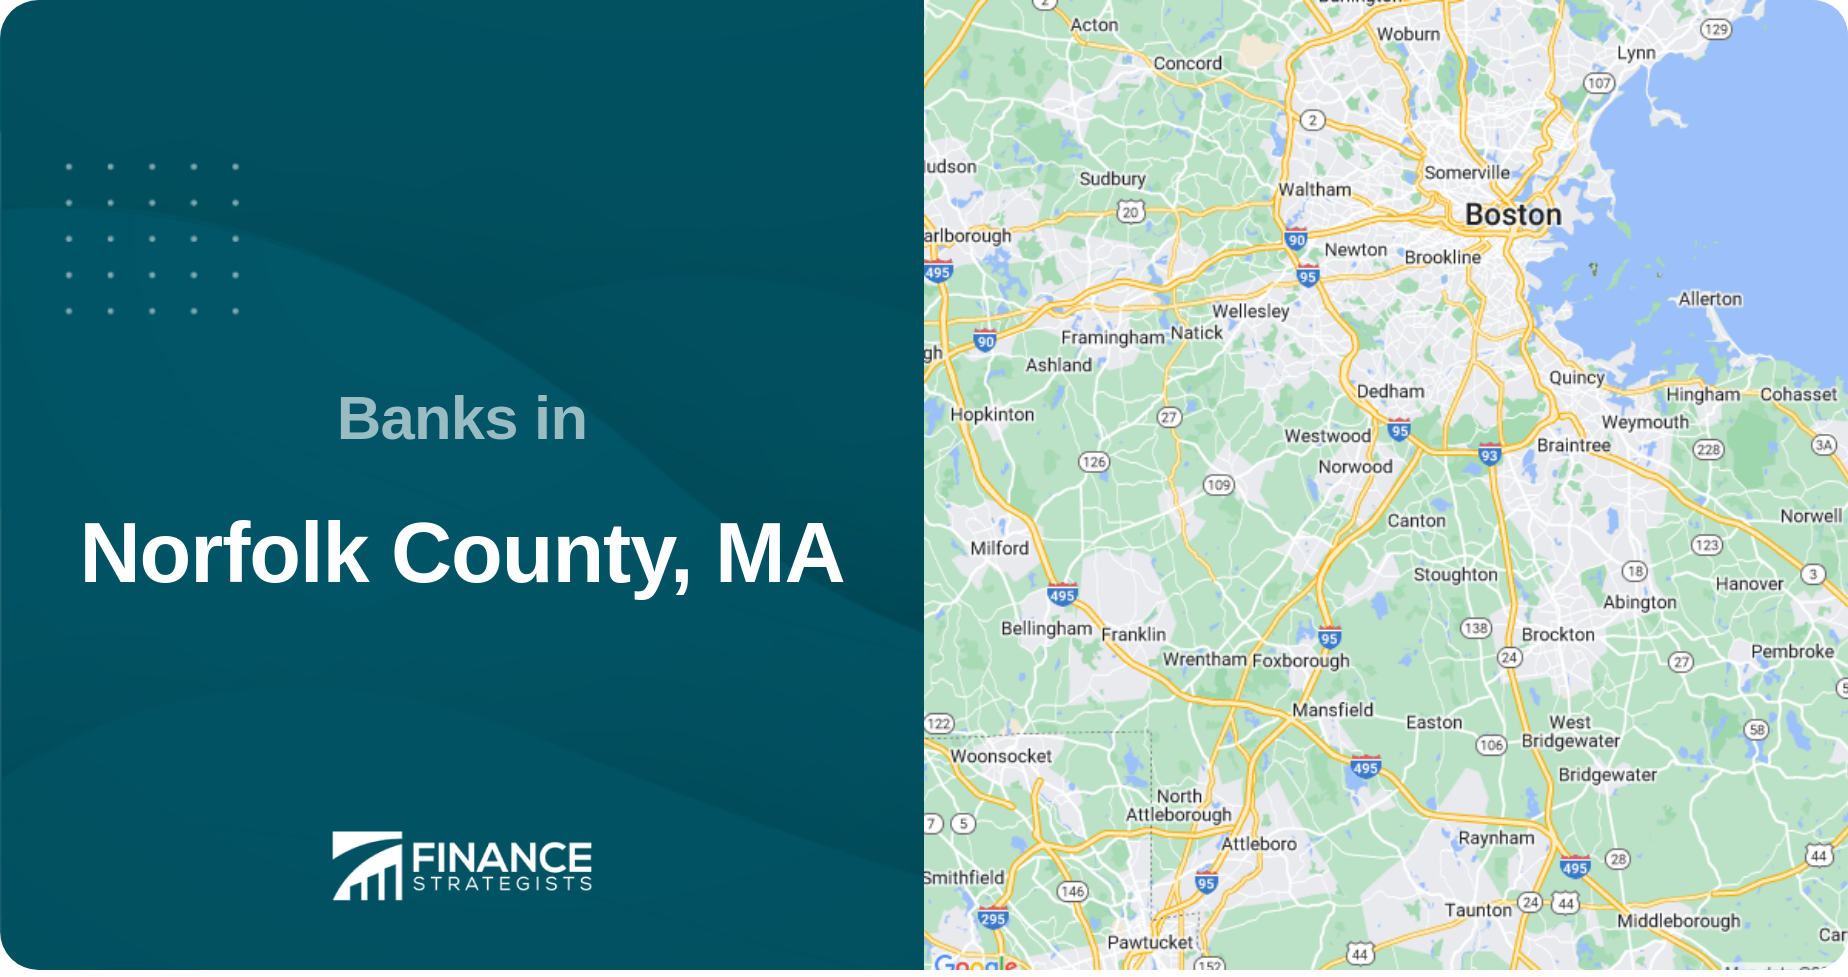 Banks in Norfolk County, MA